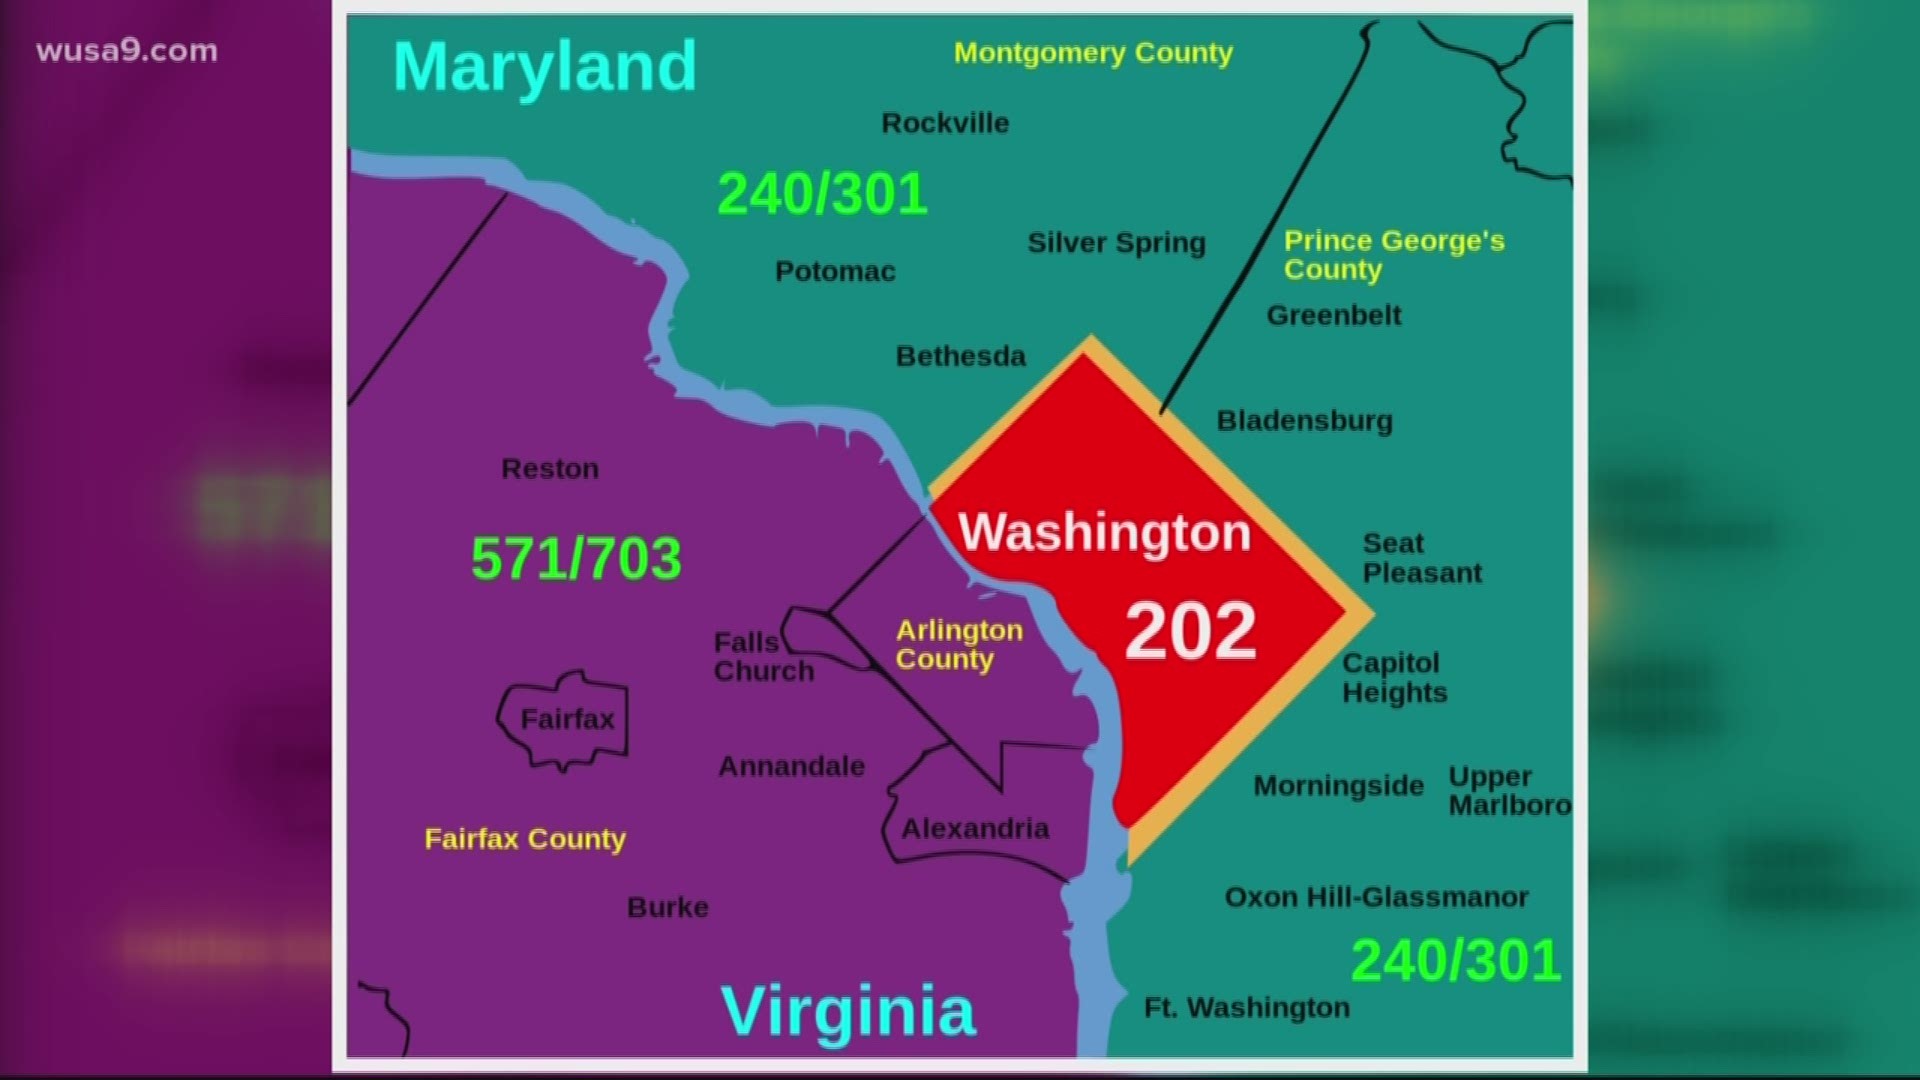 After a surge of responses to our story on the possibility of the DC's 202 area code being phased out, we're following up and answering your questions about it